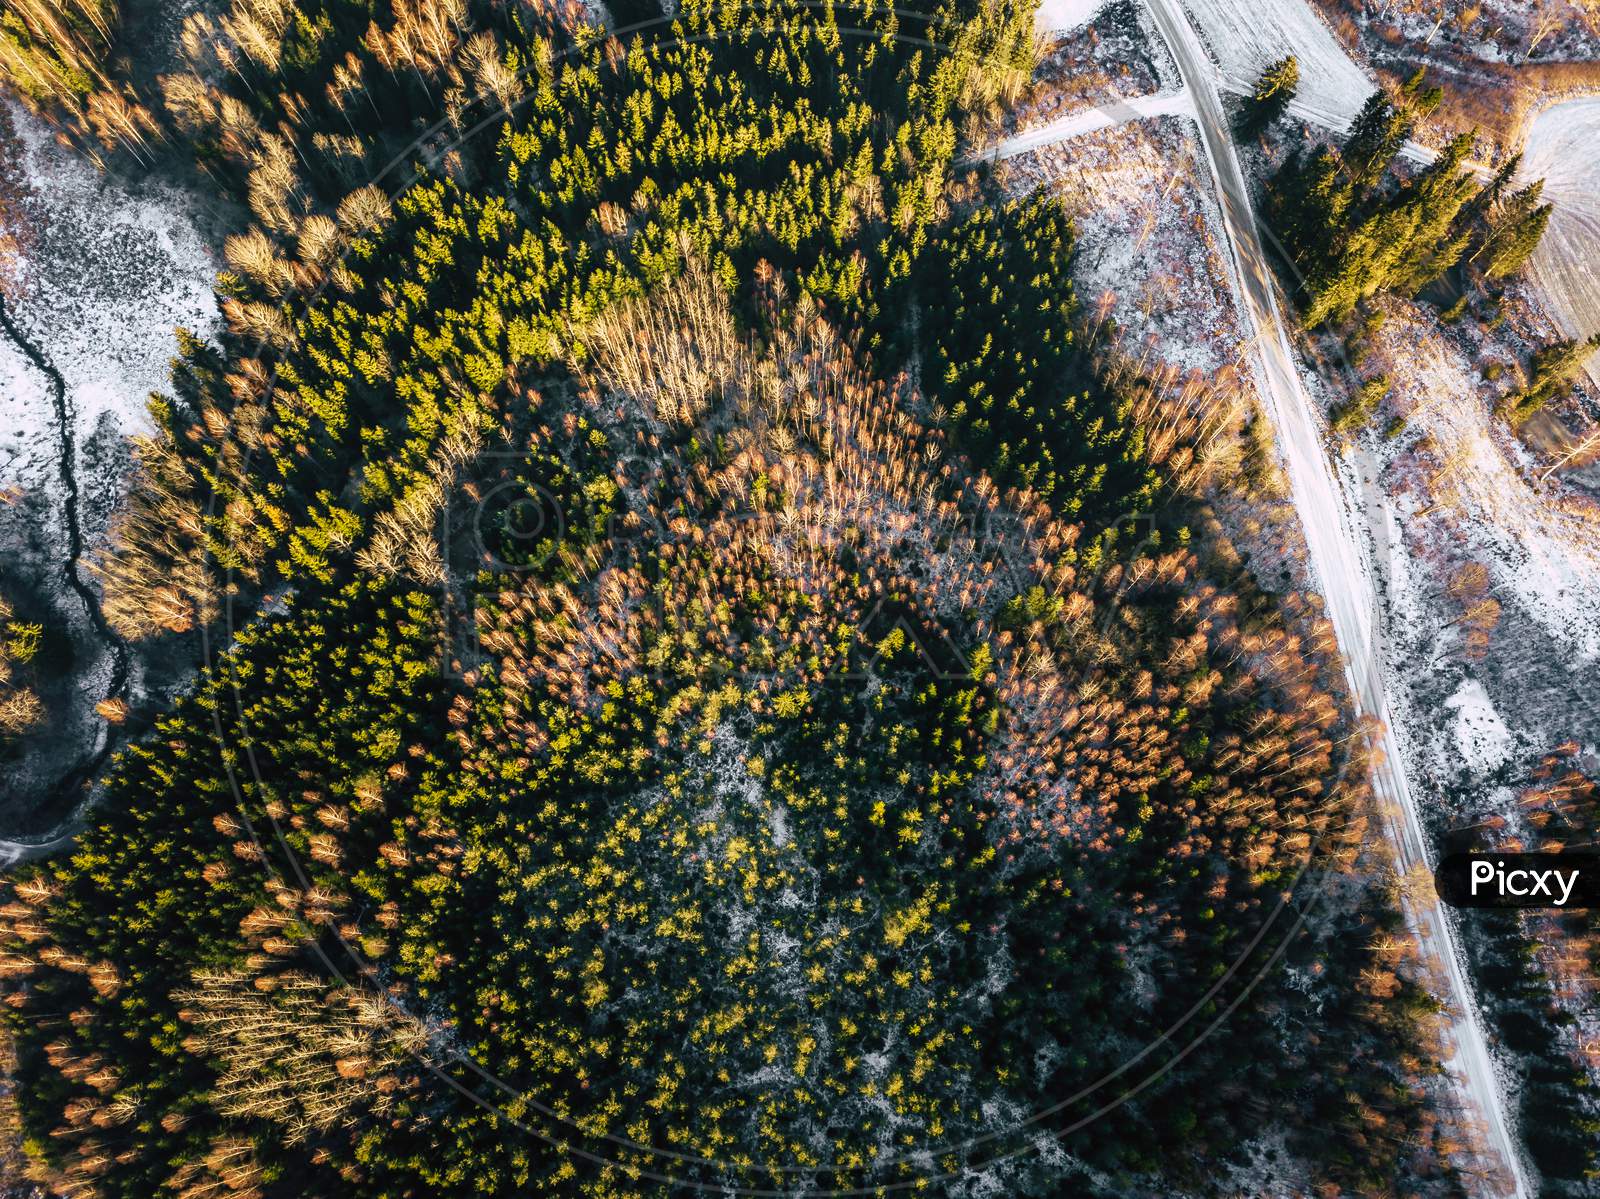 Drone Photography Of A Sunny Winter Day Of Partly Snowy Forest